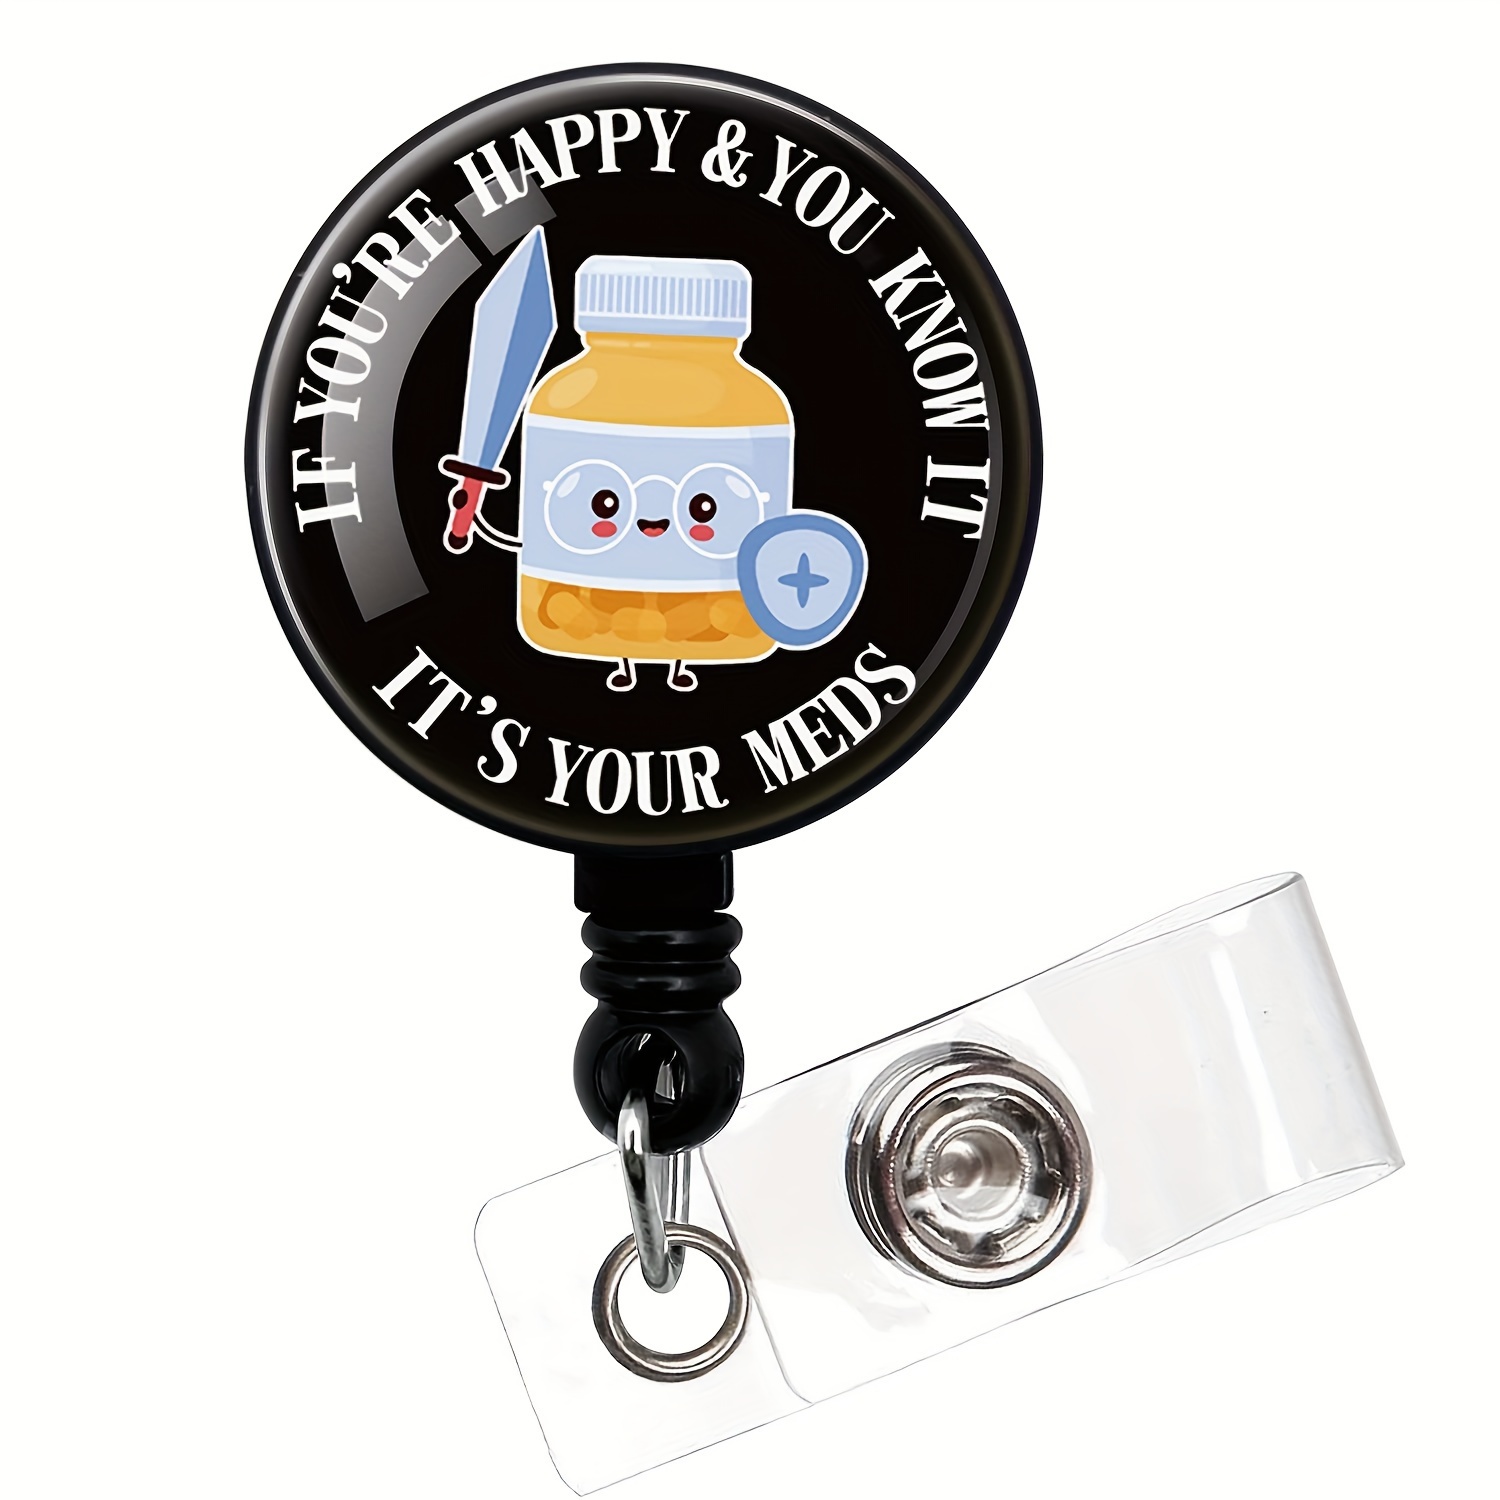 Pharmacy Tech Badge Reel If You're Happy and You Know It It's Your